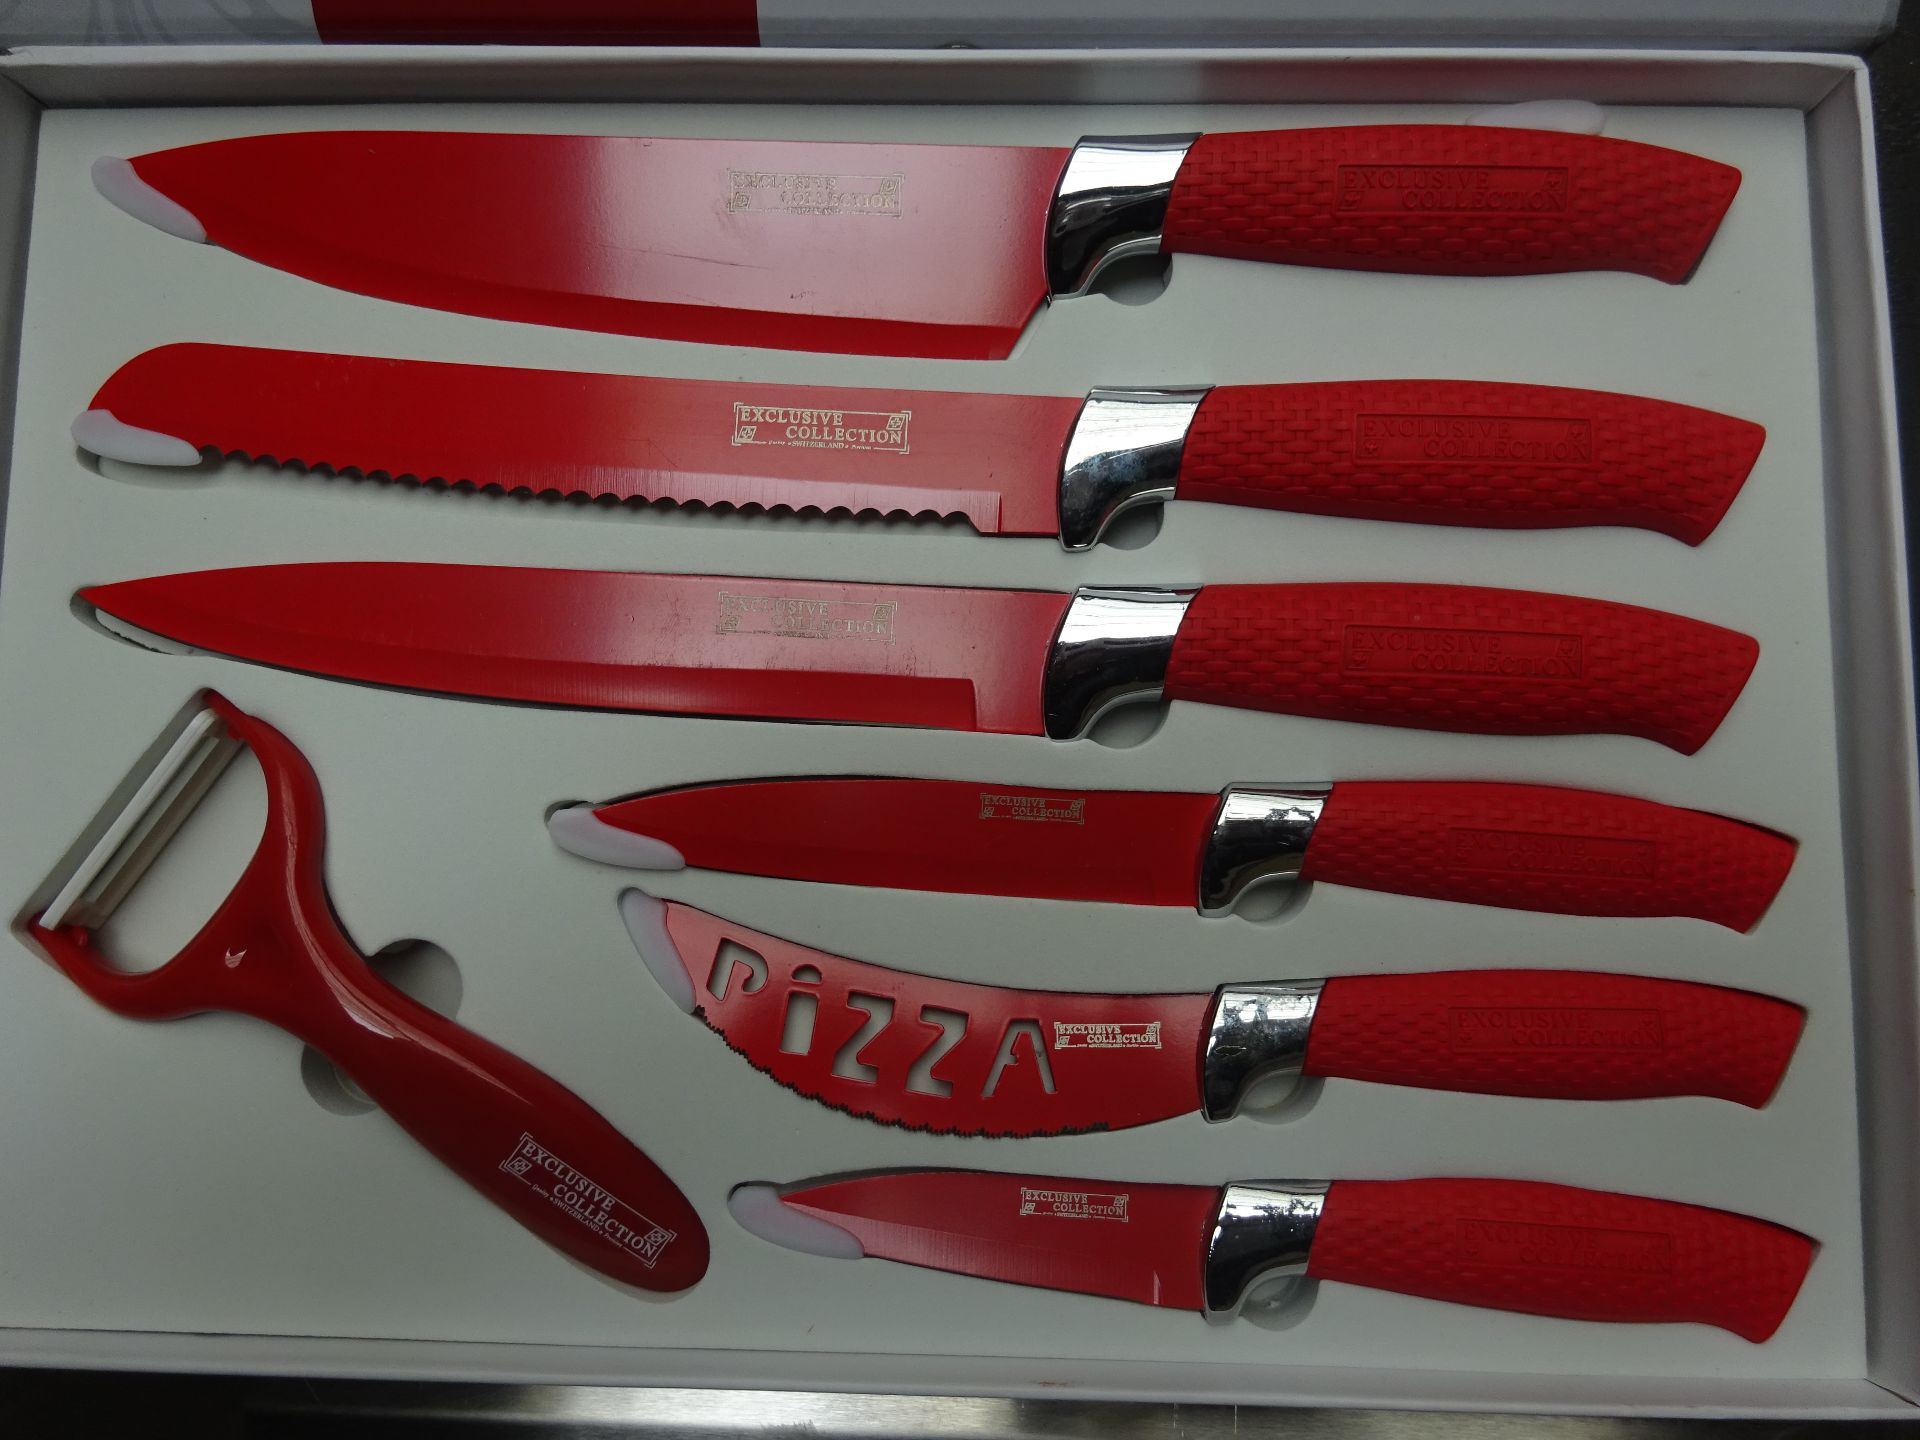 7pc knife set - red